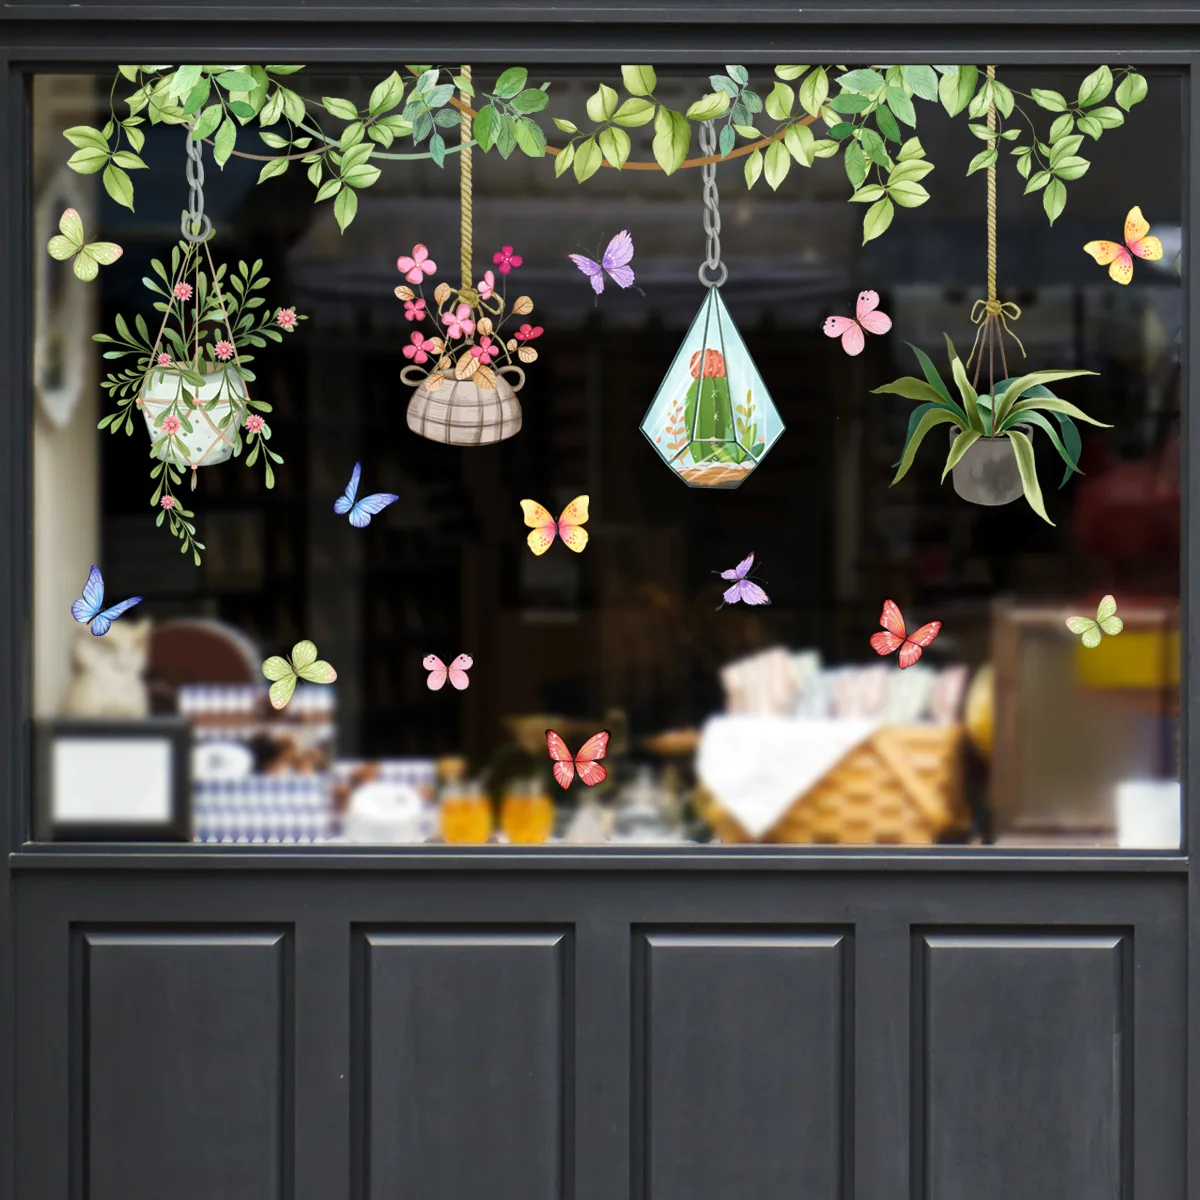 

30*60cm Plant Flower Potted Wallpaper Double-sided Visual Glass Sticker Kitchen Restaurant Decorative Wall Sticker Ct6056